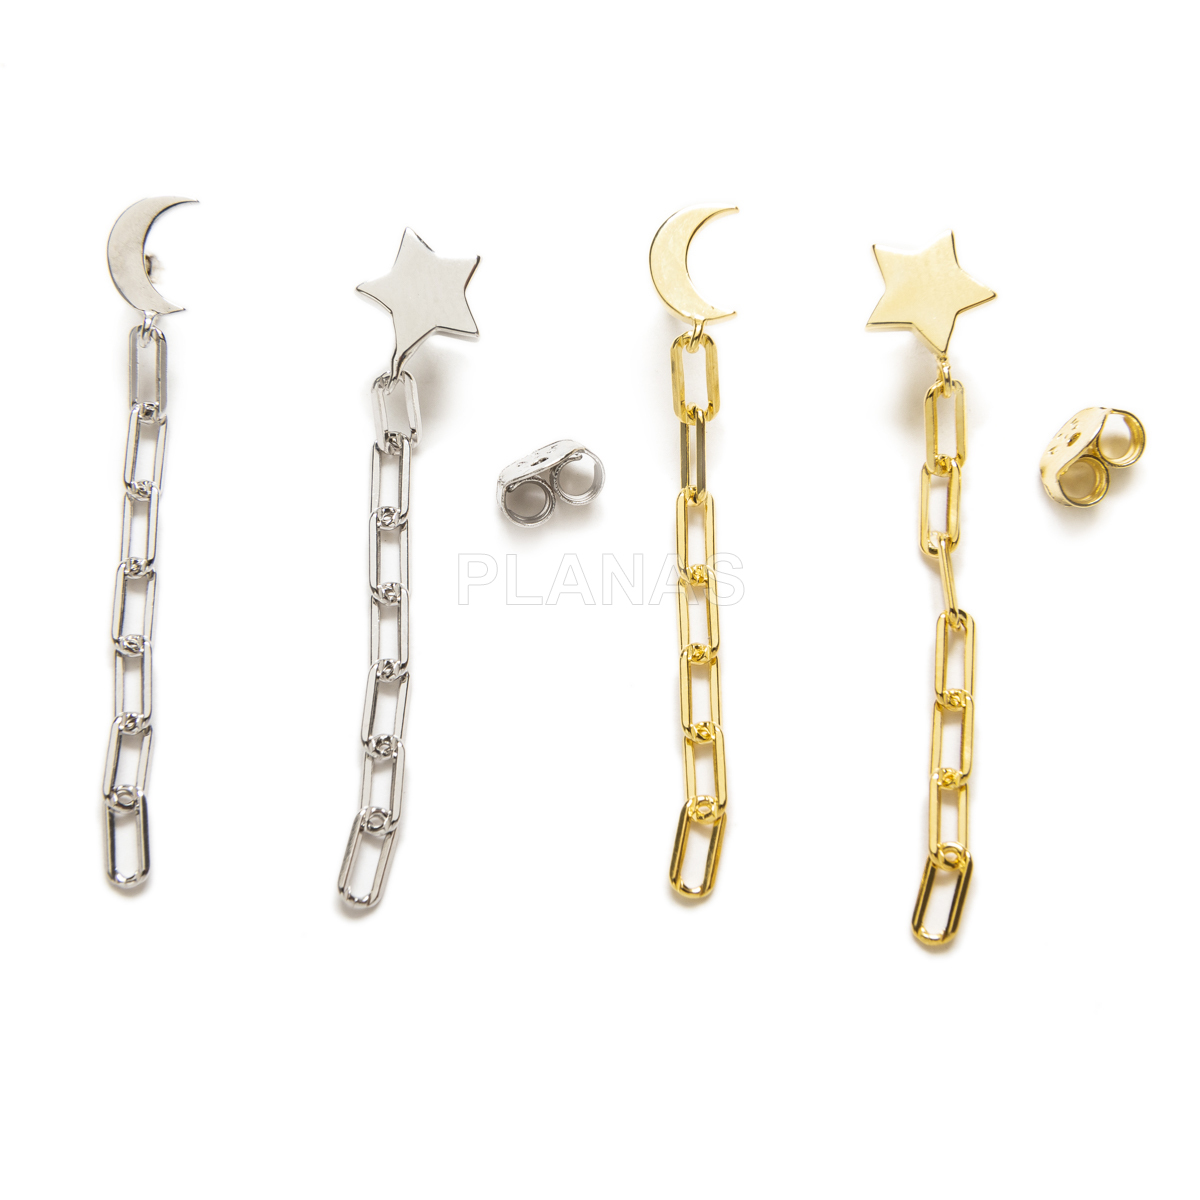 Sterling silver earrings. moon and star.